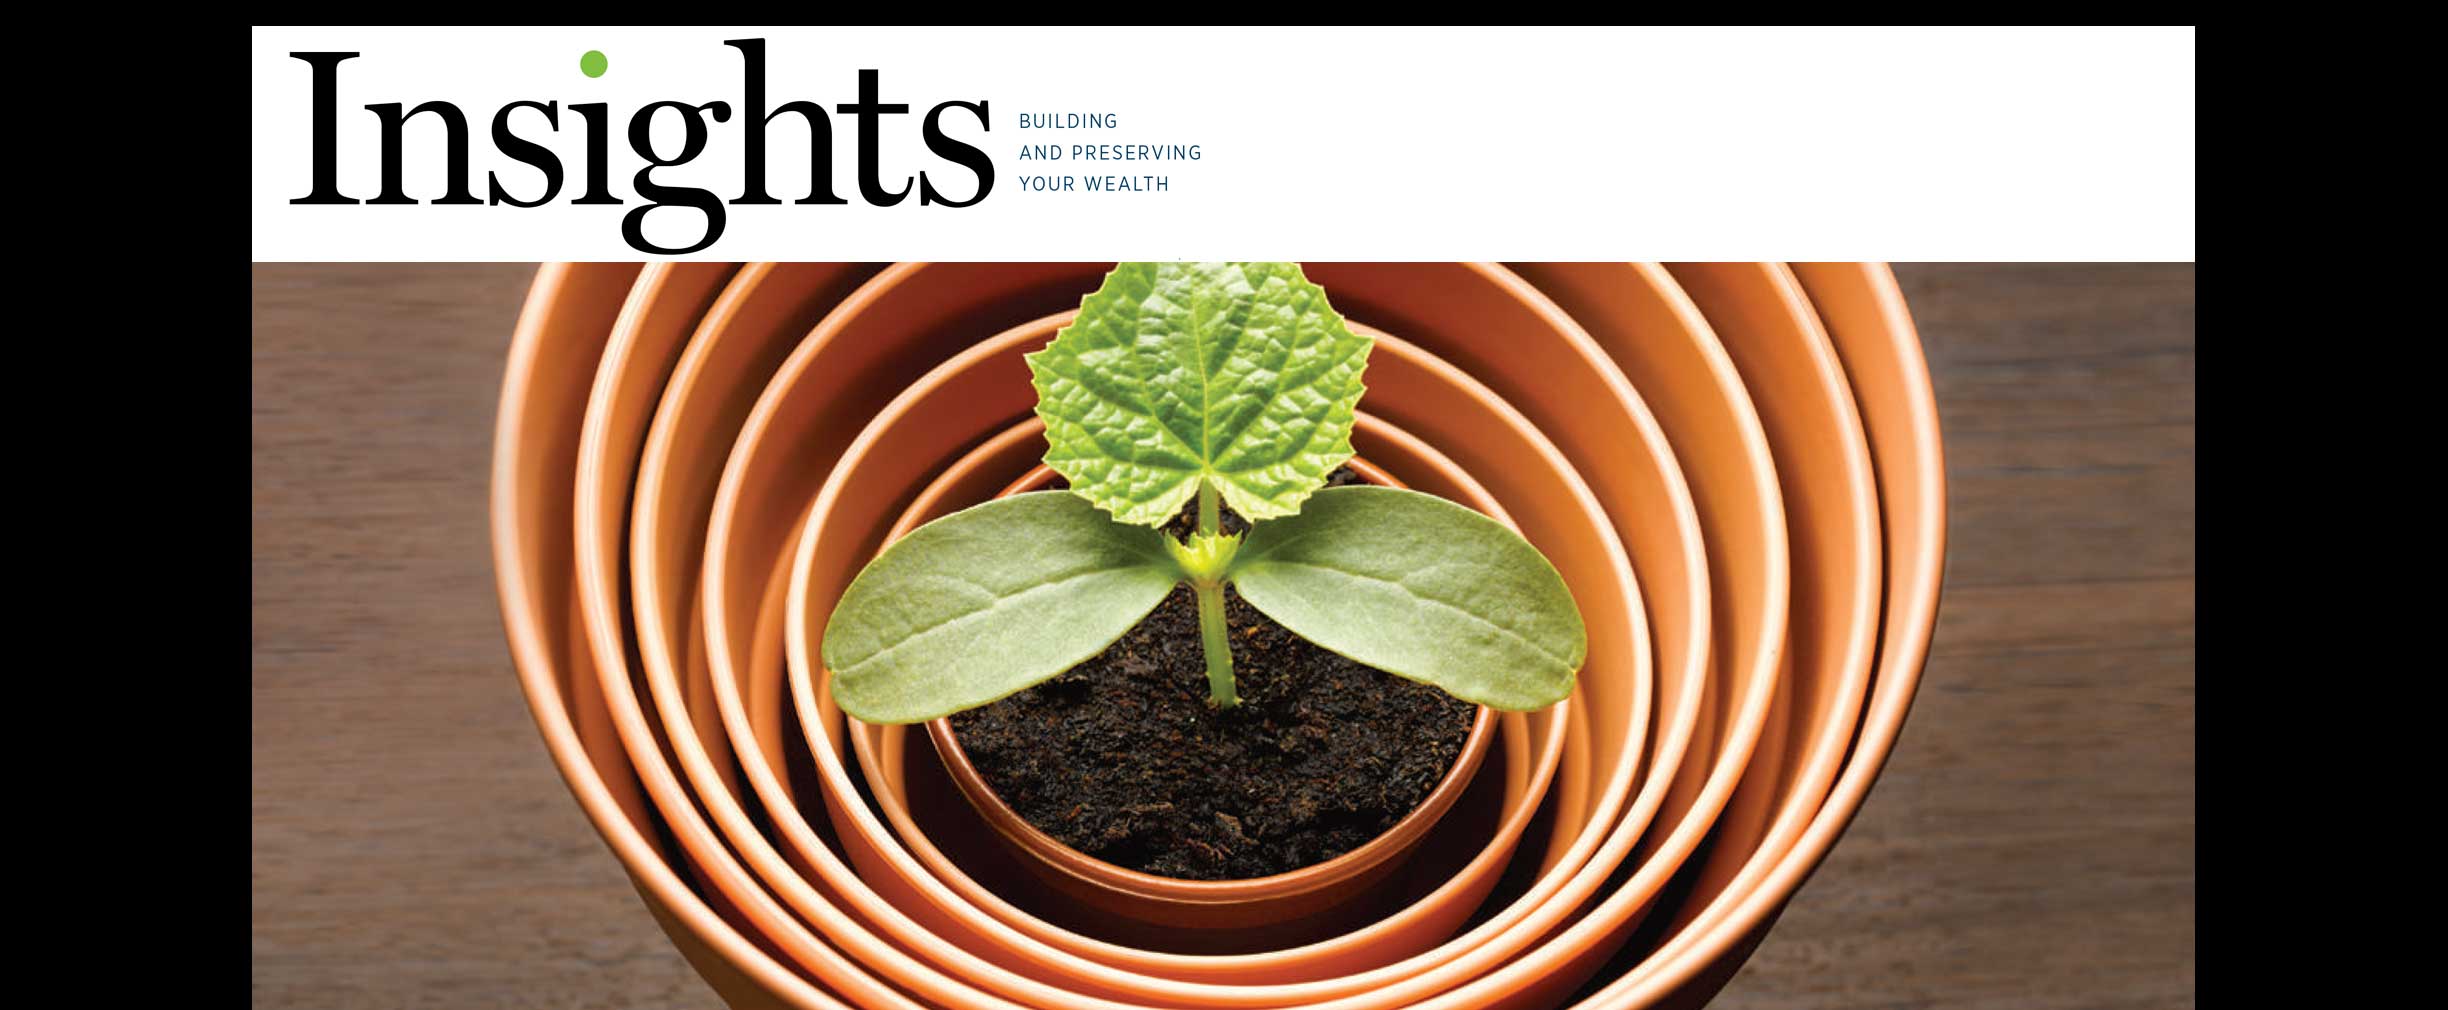 Insights Magazine Spring 2016 Growing Your Next Million